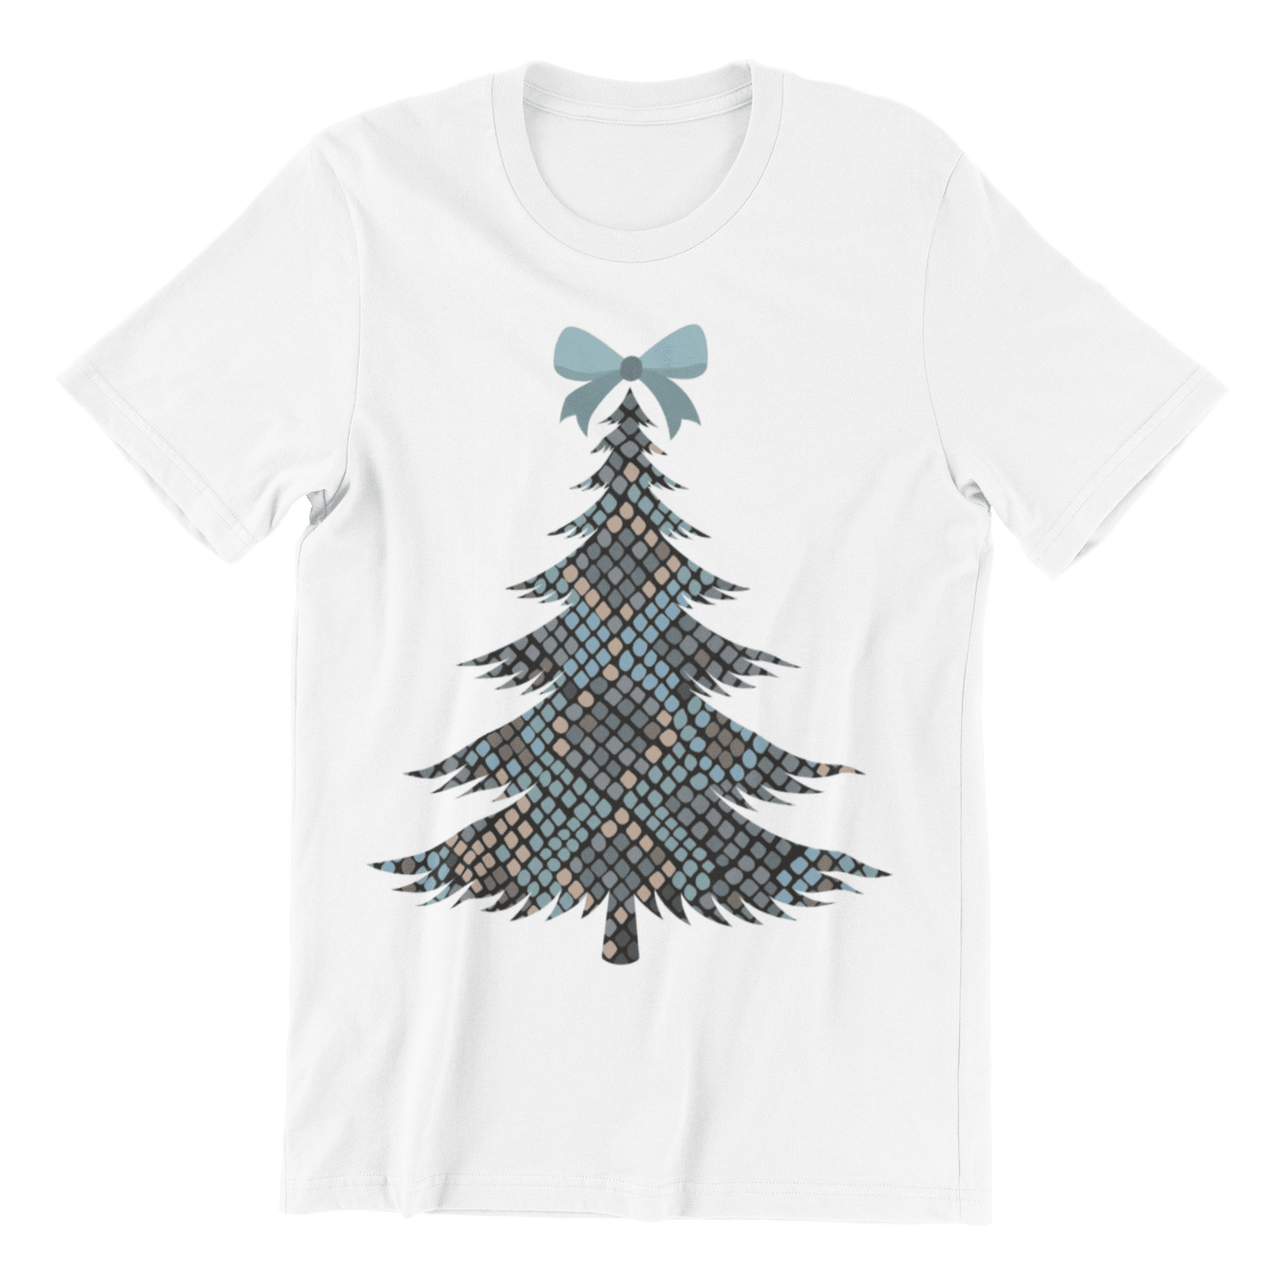 Unisex Adult Christmas Tree For Men and Women Unisex T-Shirt For Men And Women 8Ball